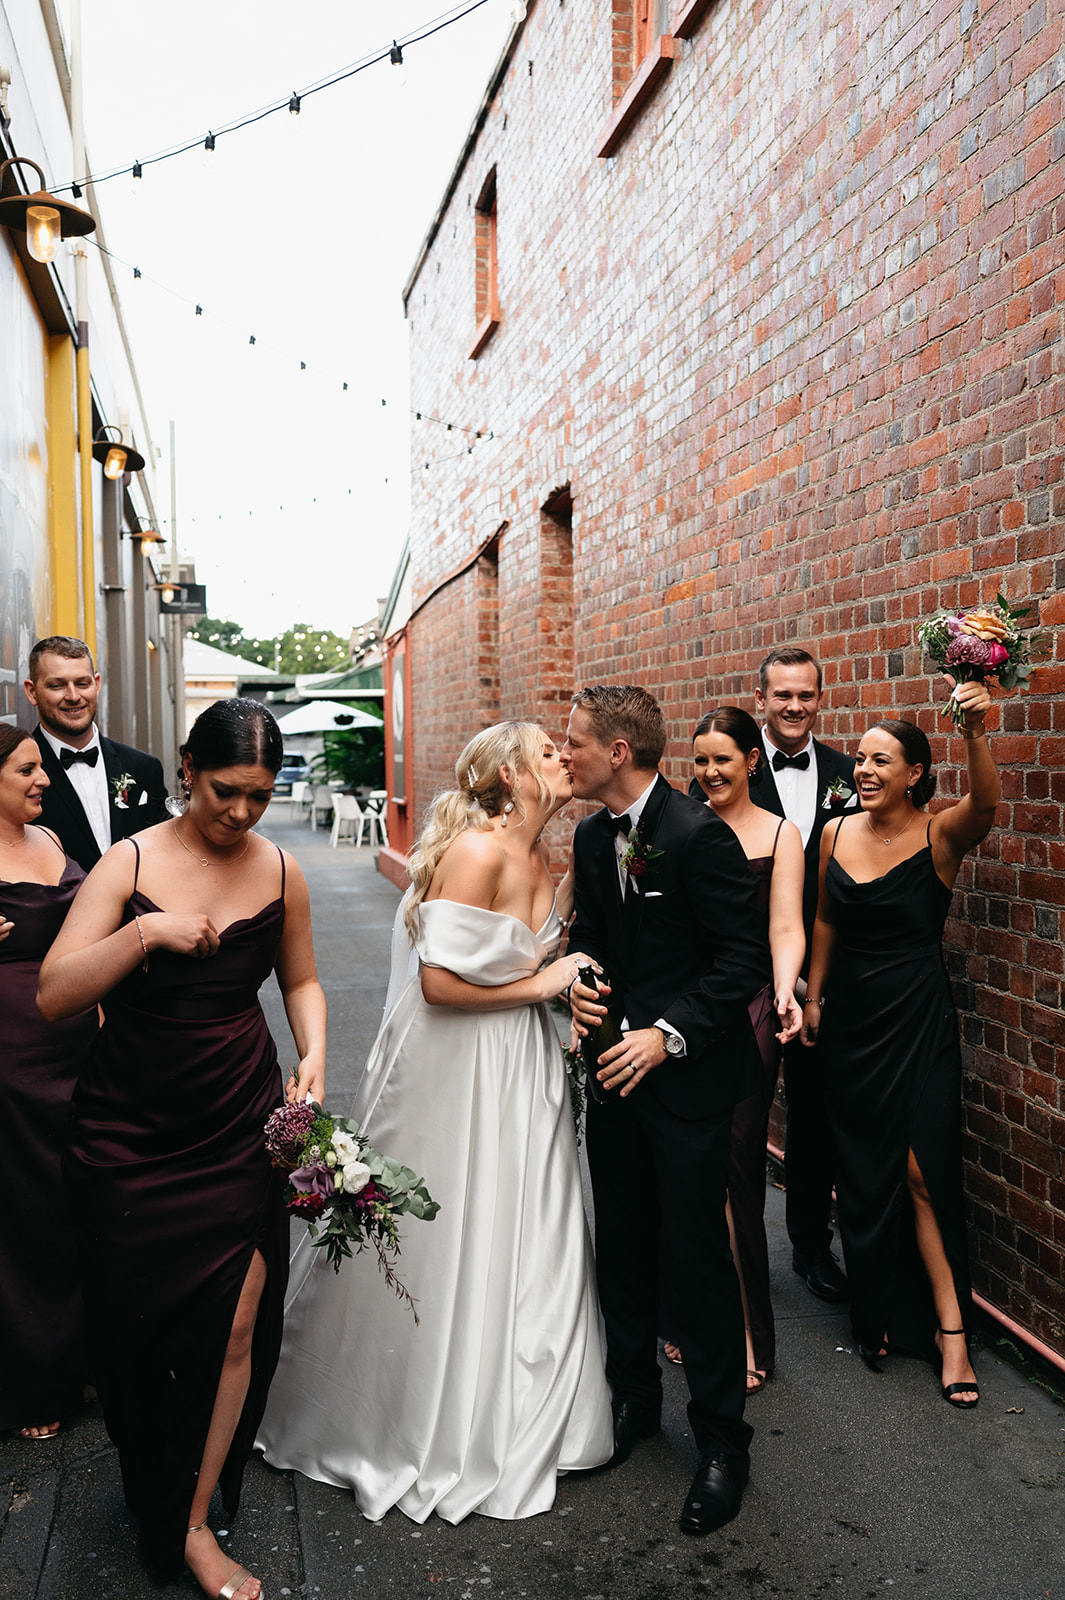 Bridal party photos at The Three Wolves in Cairns